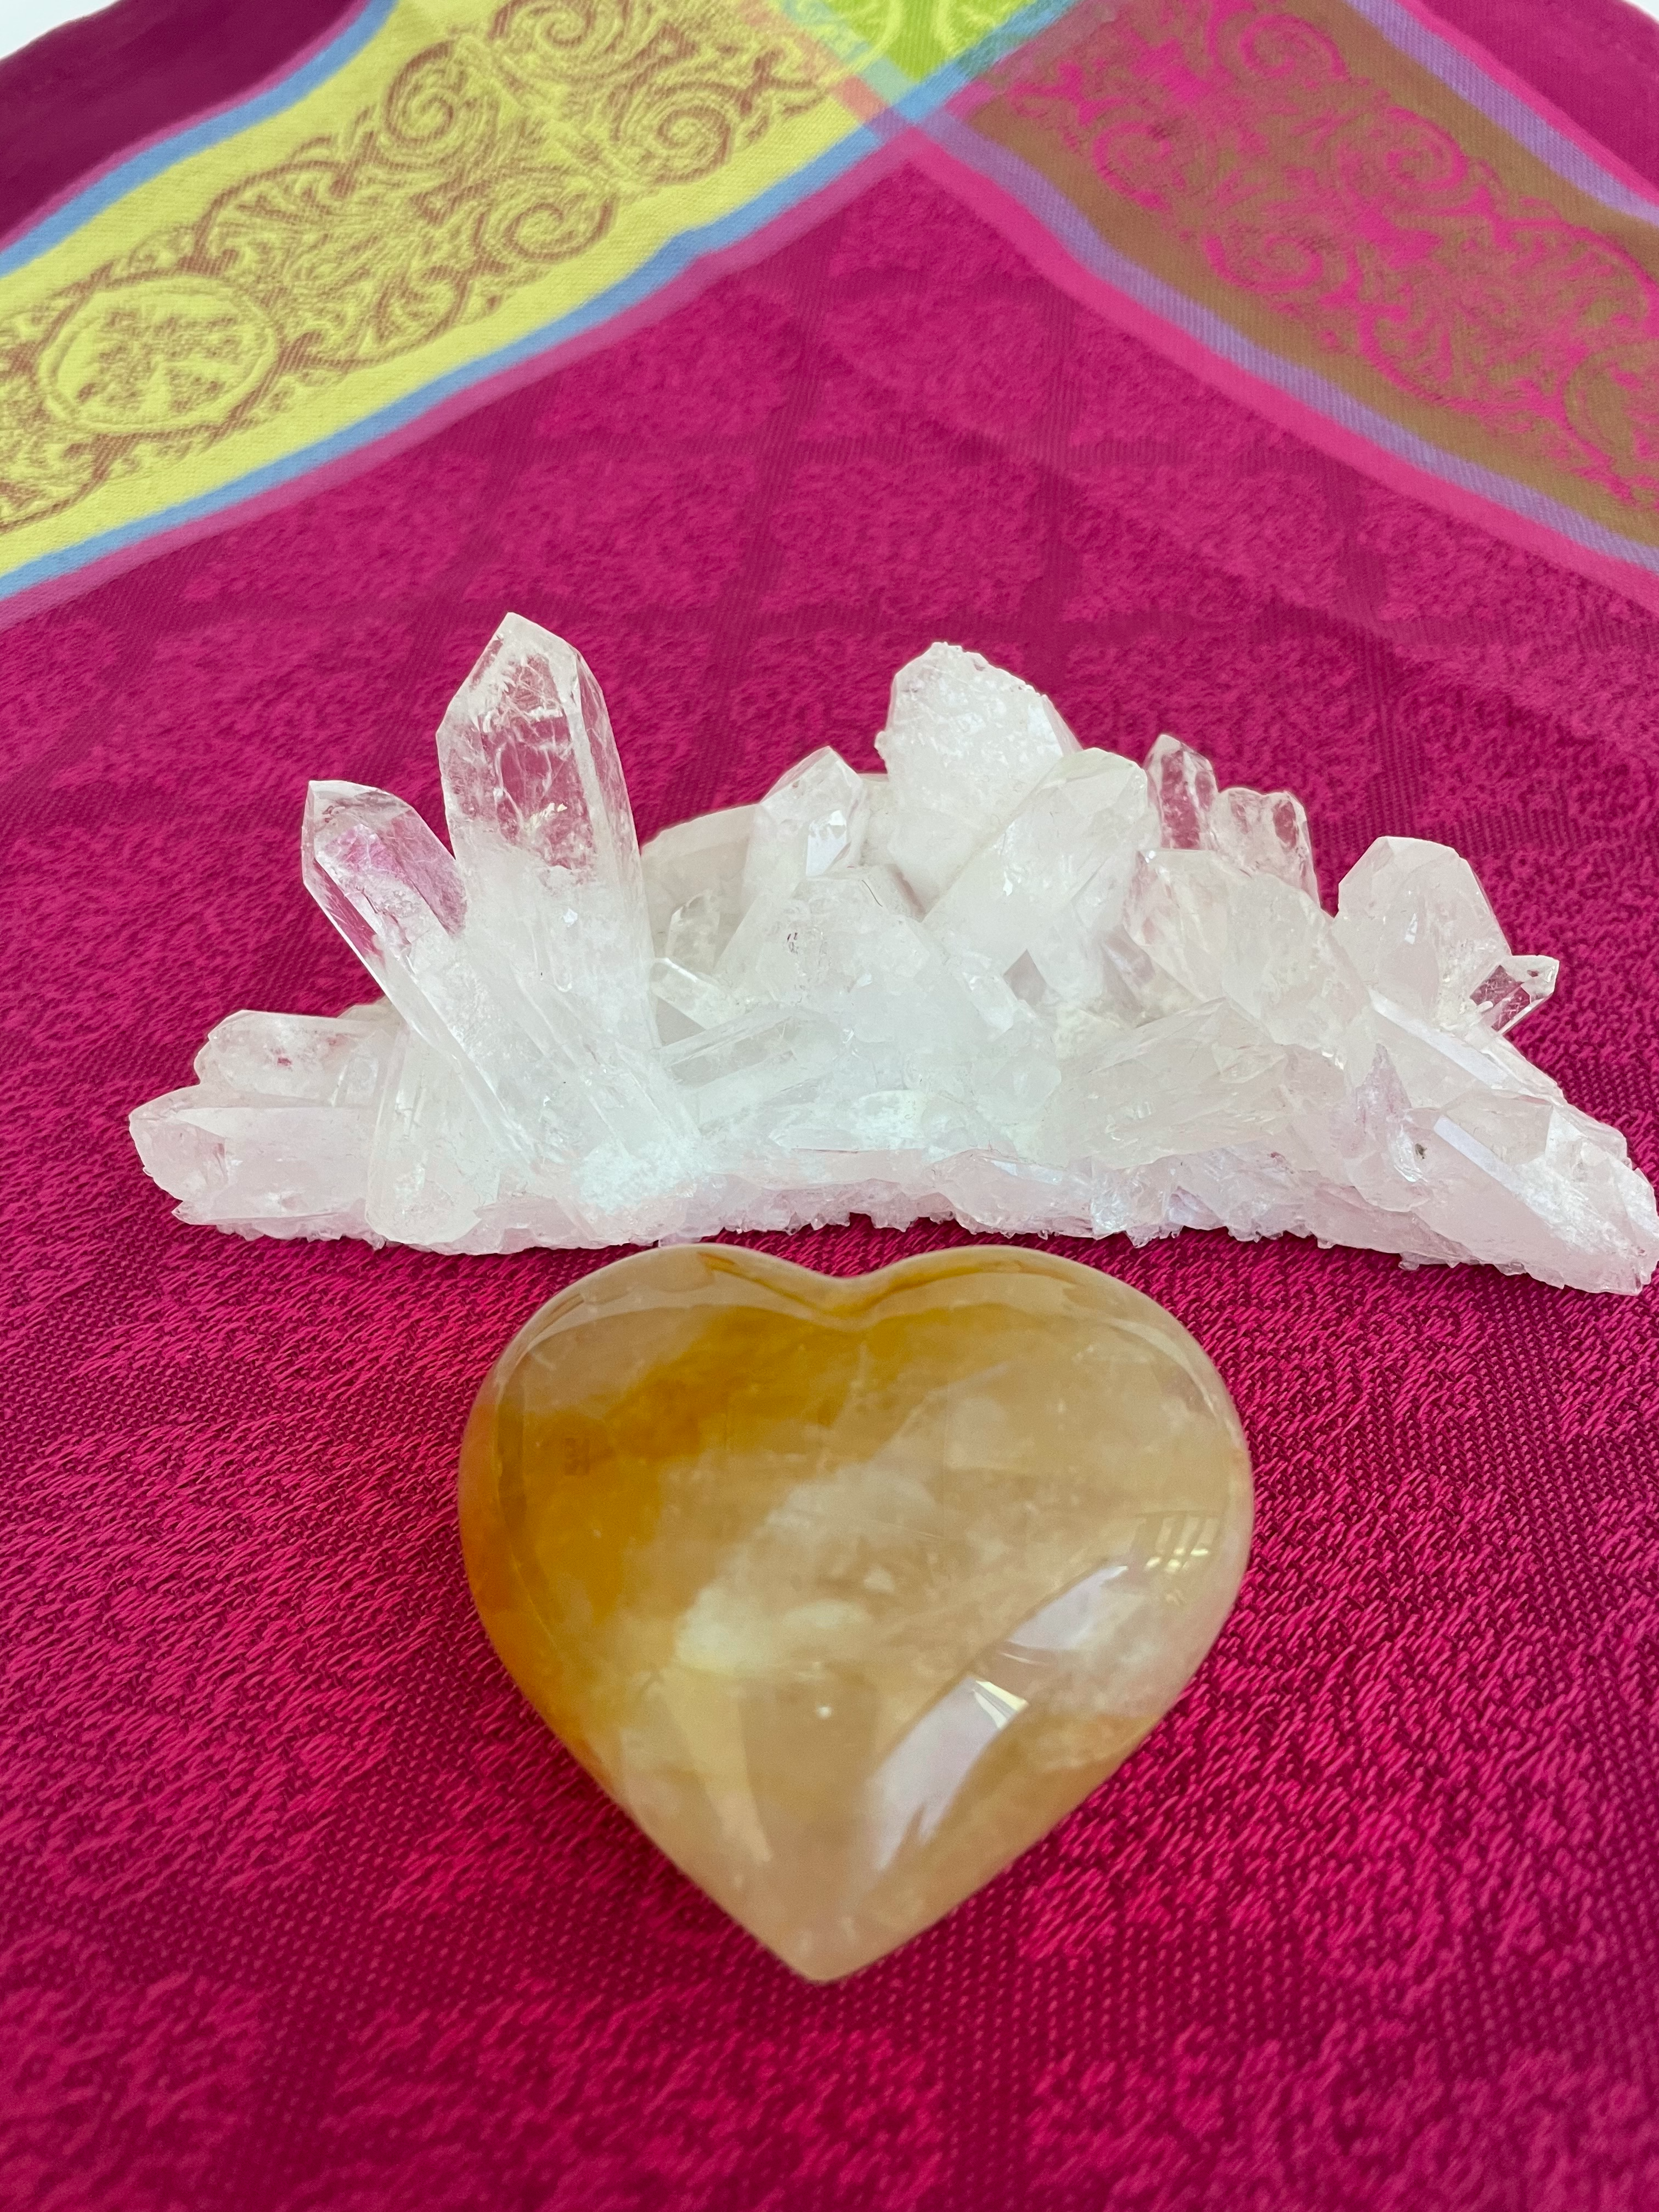 Reverse side. Beautiful citrine (yellow quartz) heart! Great to place on your altar or bookshelf, to hold during meditation, to use for healing or as a décor item in your home of office. Citrine absorbs and dispels negative energy, is a stone of abundance - attracting money, prosperity and success, warming & energizing, enhances creativity, brings a positive attitude, is cleansing and more. This citrine heart is approximately 2" at it's widest expanse. Cost is $24.